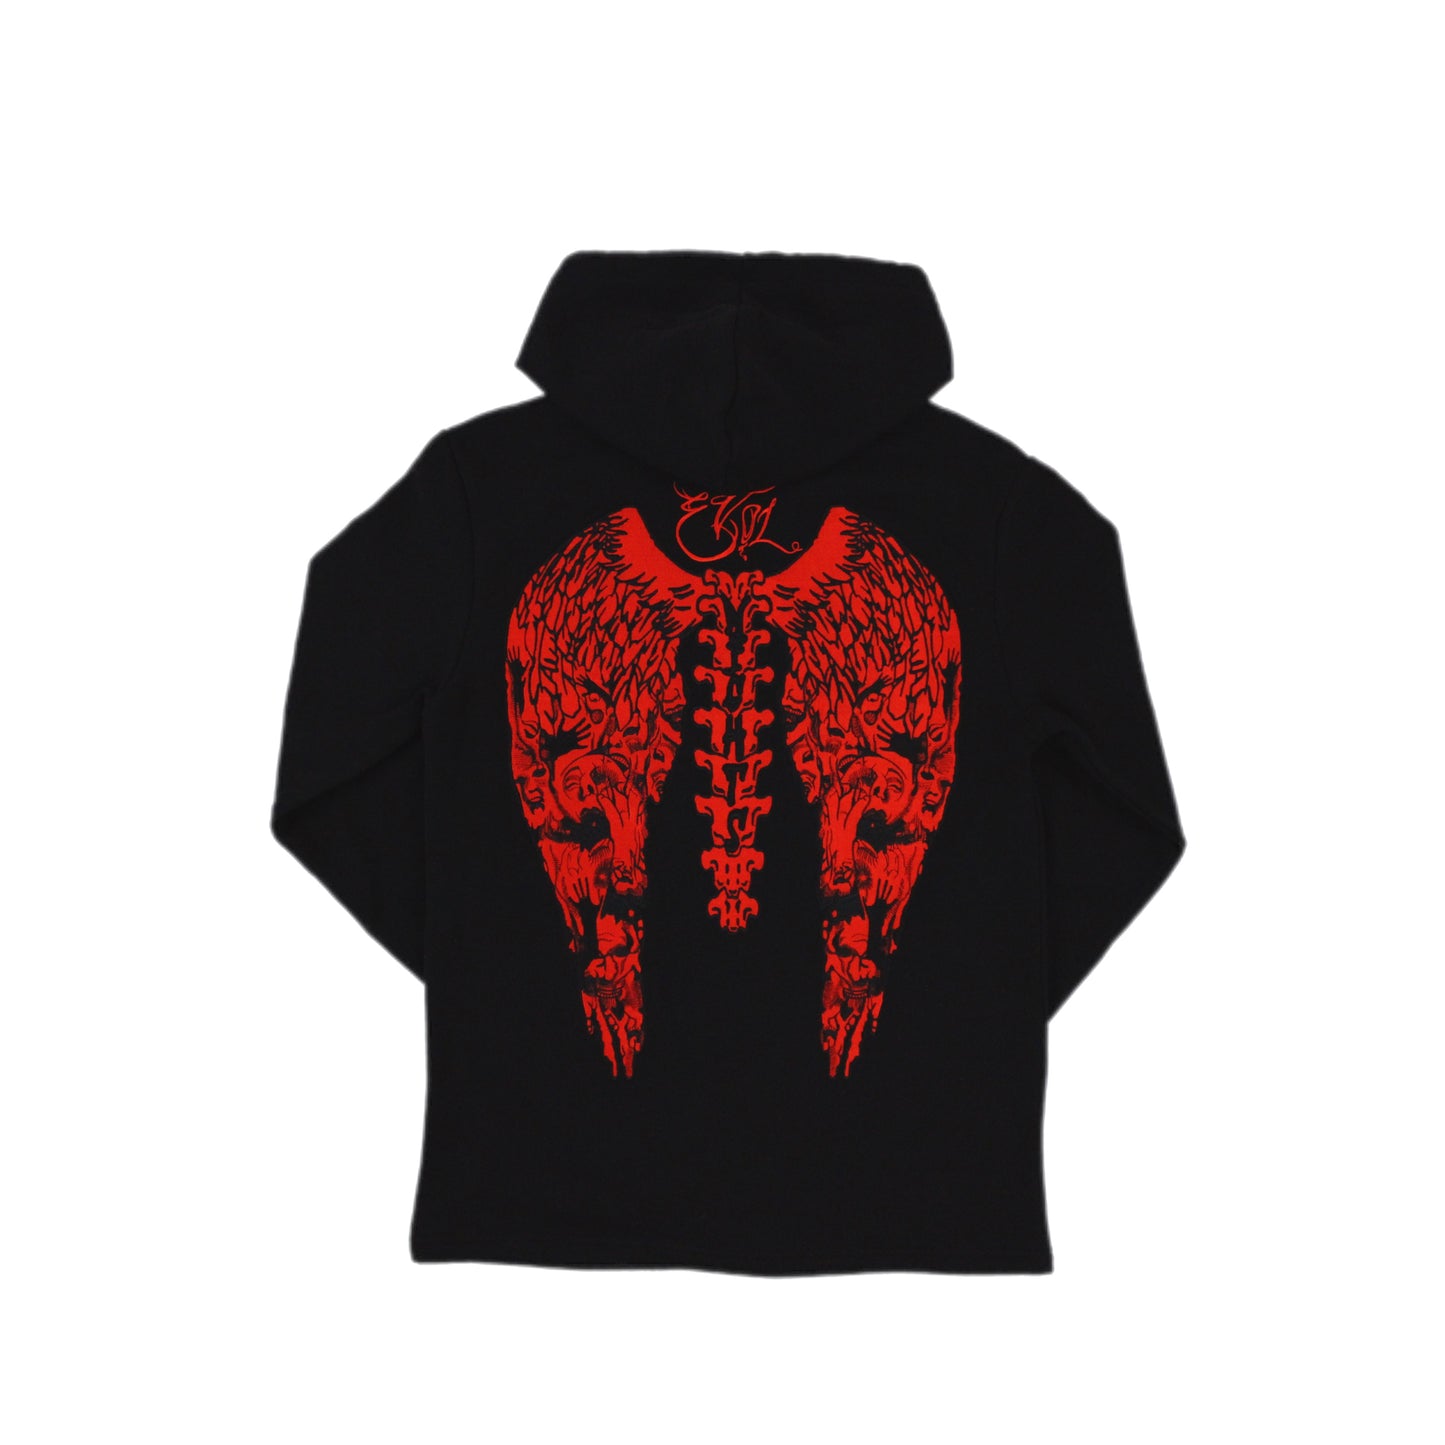 EVOL NIGHTS Trapped Soul Hoodie Black and Red